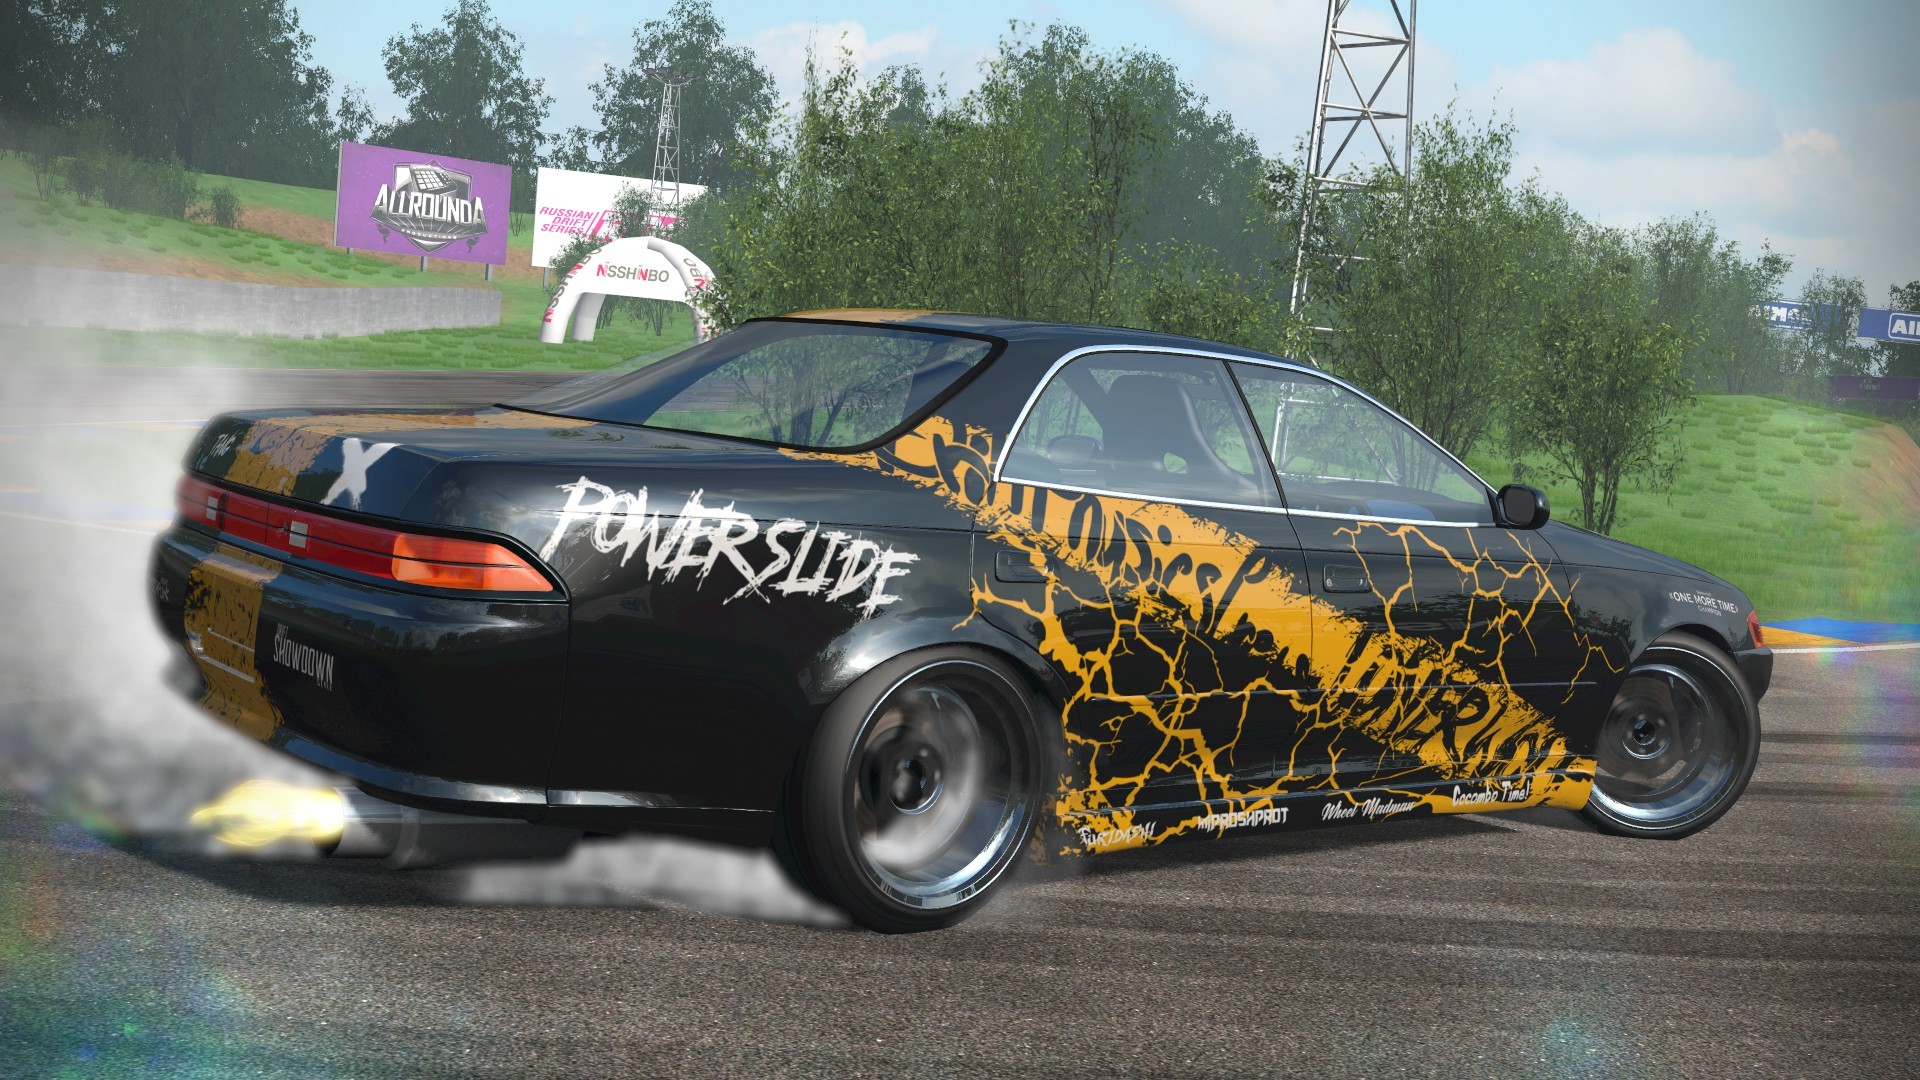 rds-the-official-drift-videogame-pc-screenshot-www.ovagames.com-2